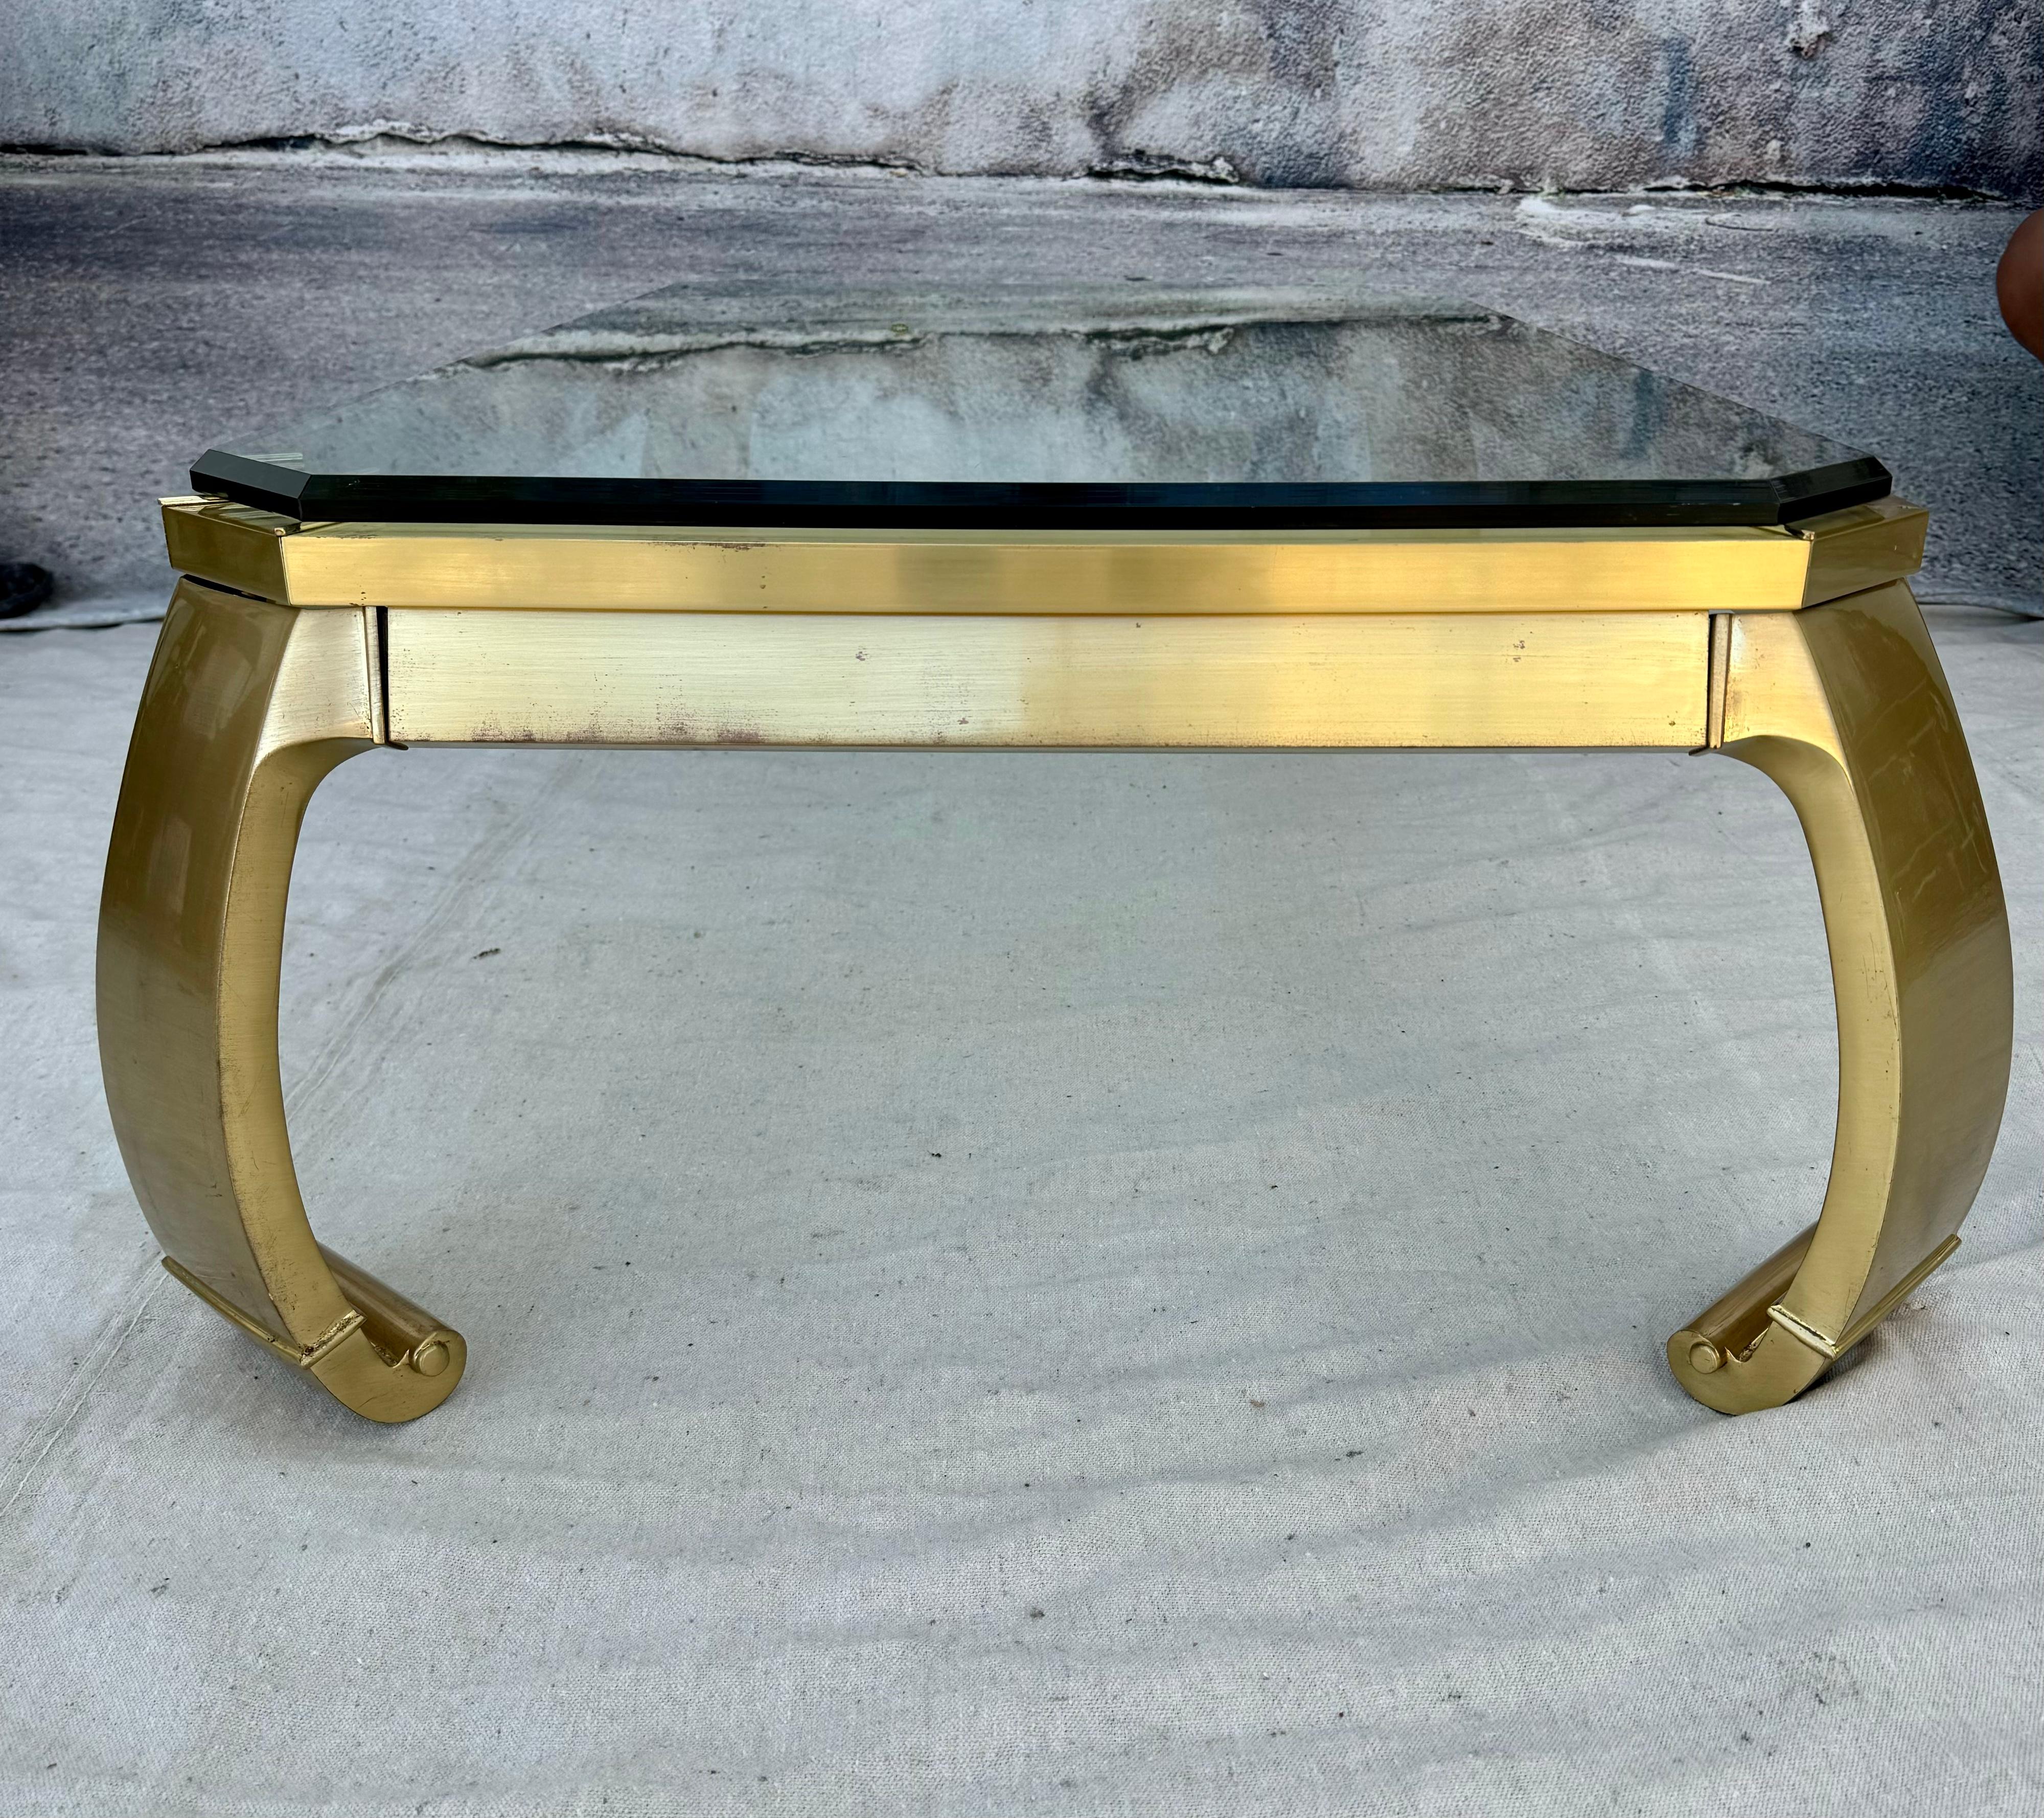 Hollywood Regency Asian Inspired Brass Coffee Table, Mastercraft Style For Sale